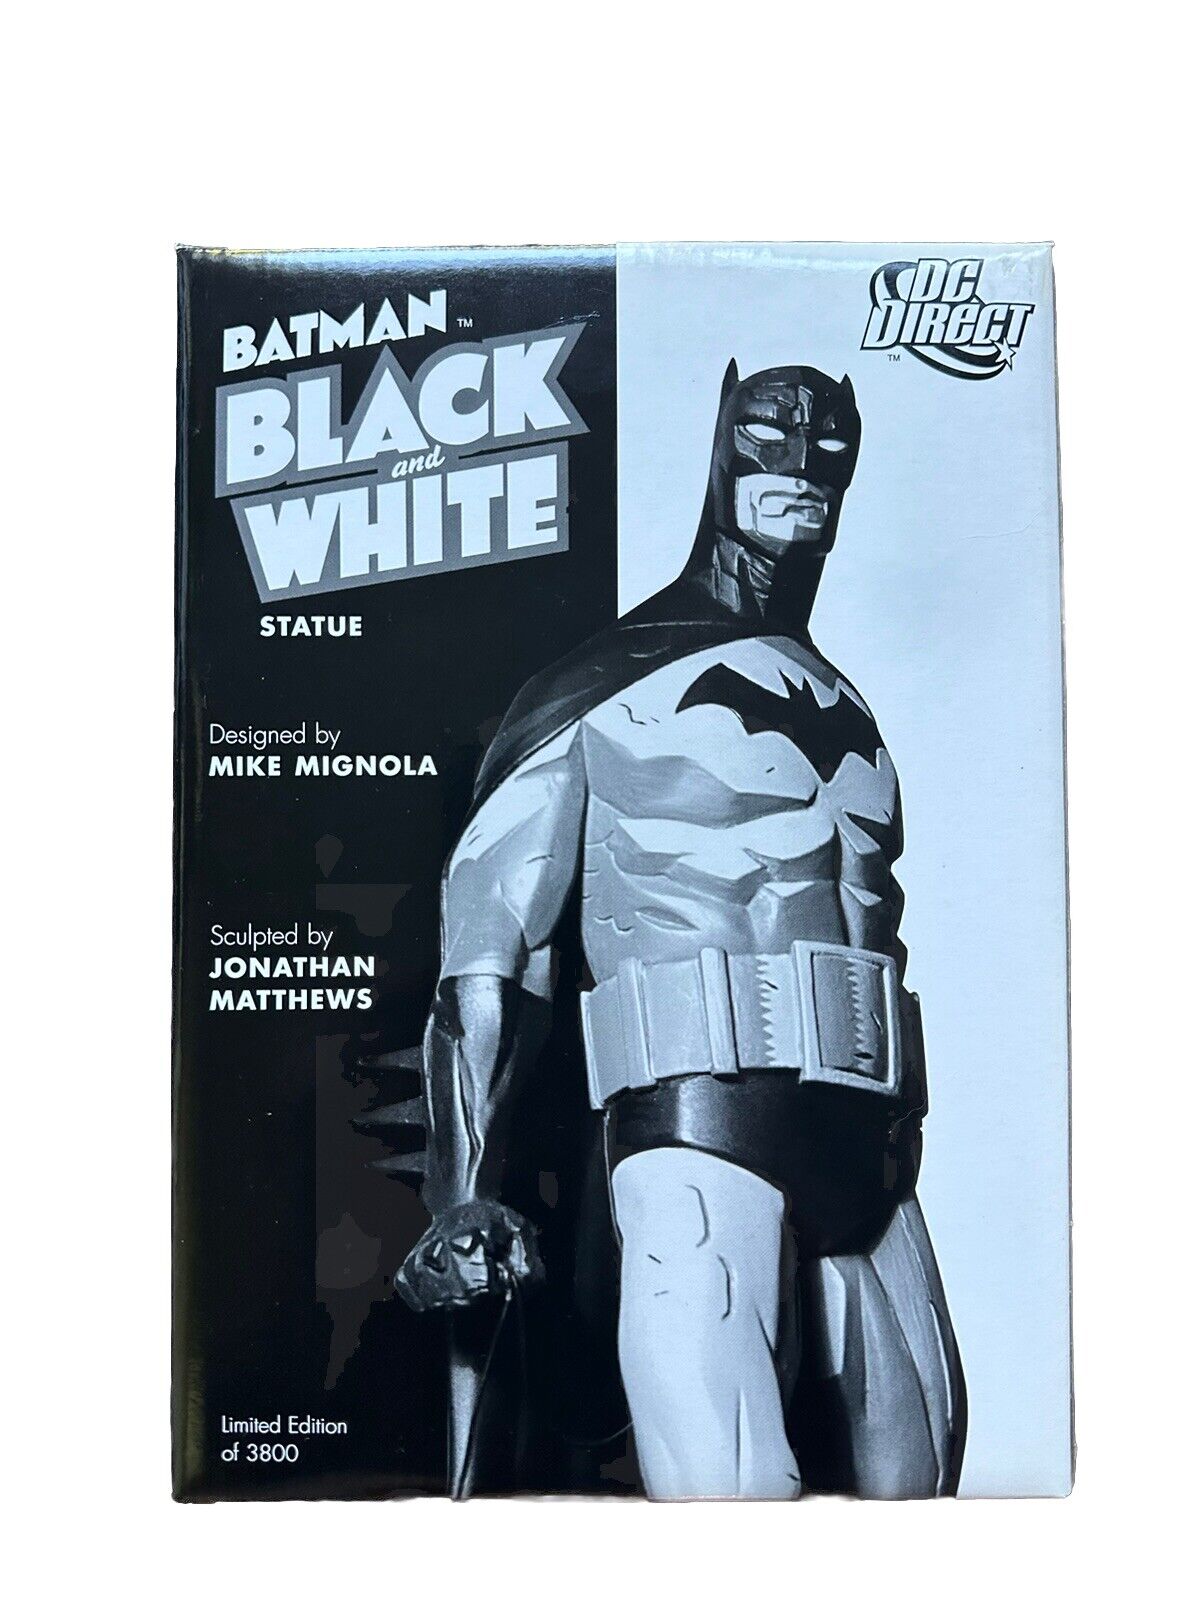 Batman Black And White Statue Mike Mignola Limited Edition 1357 Of 3800